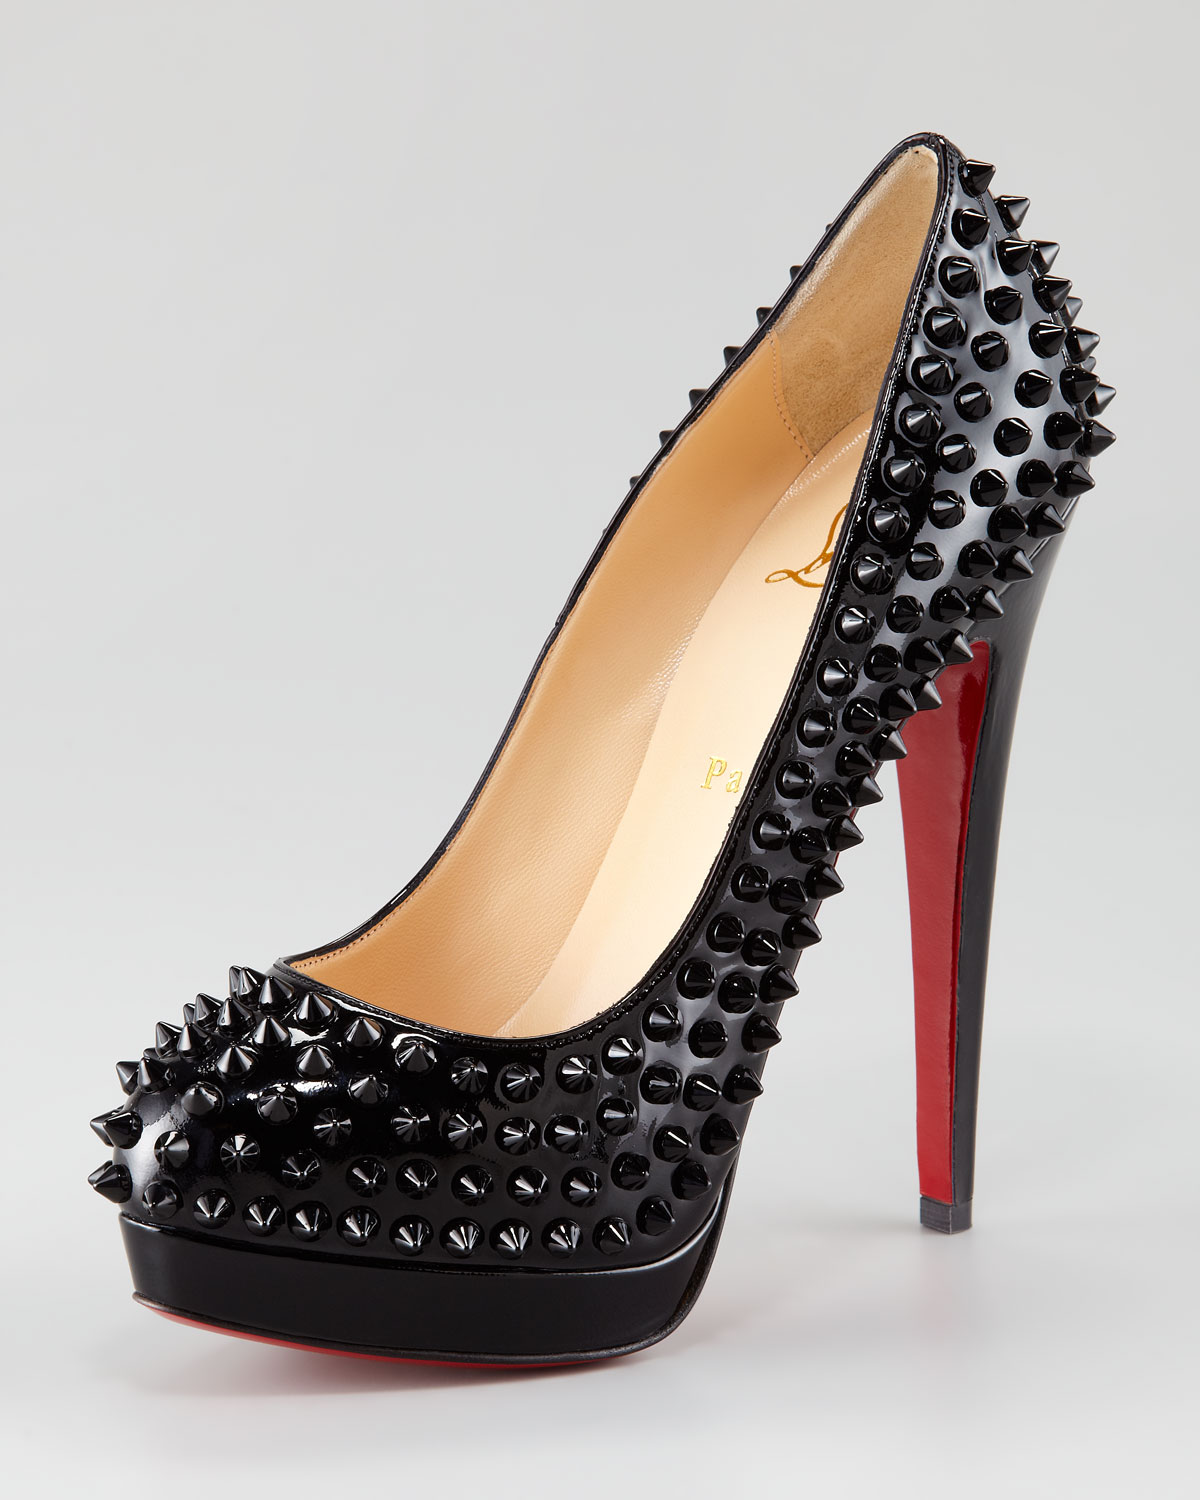 christian louboutin alti spike red sole pump shoes